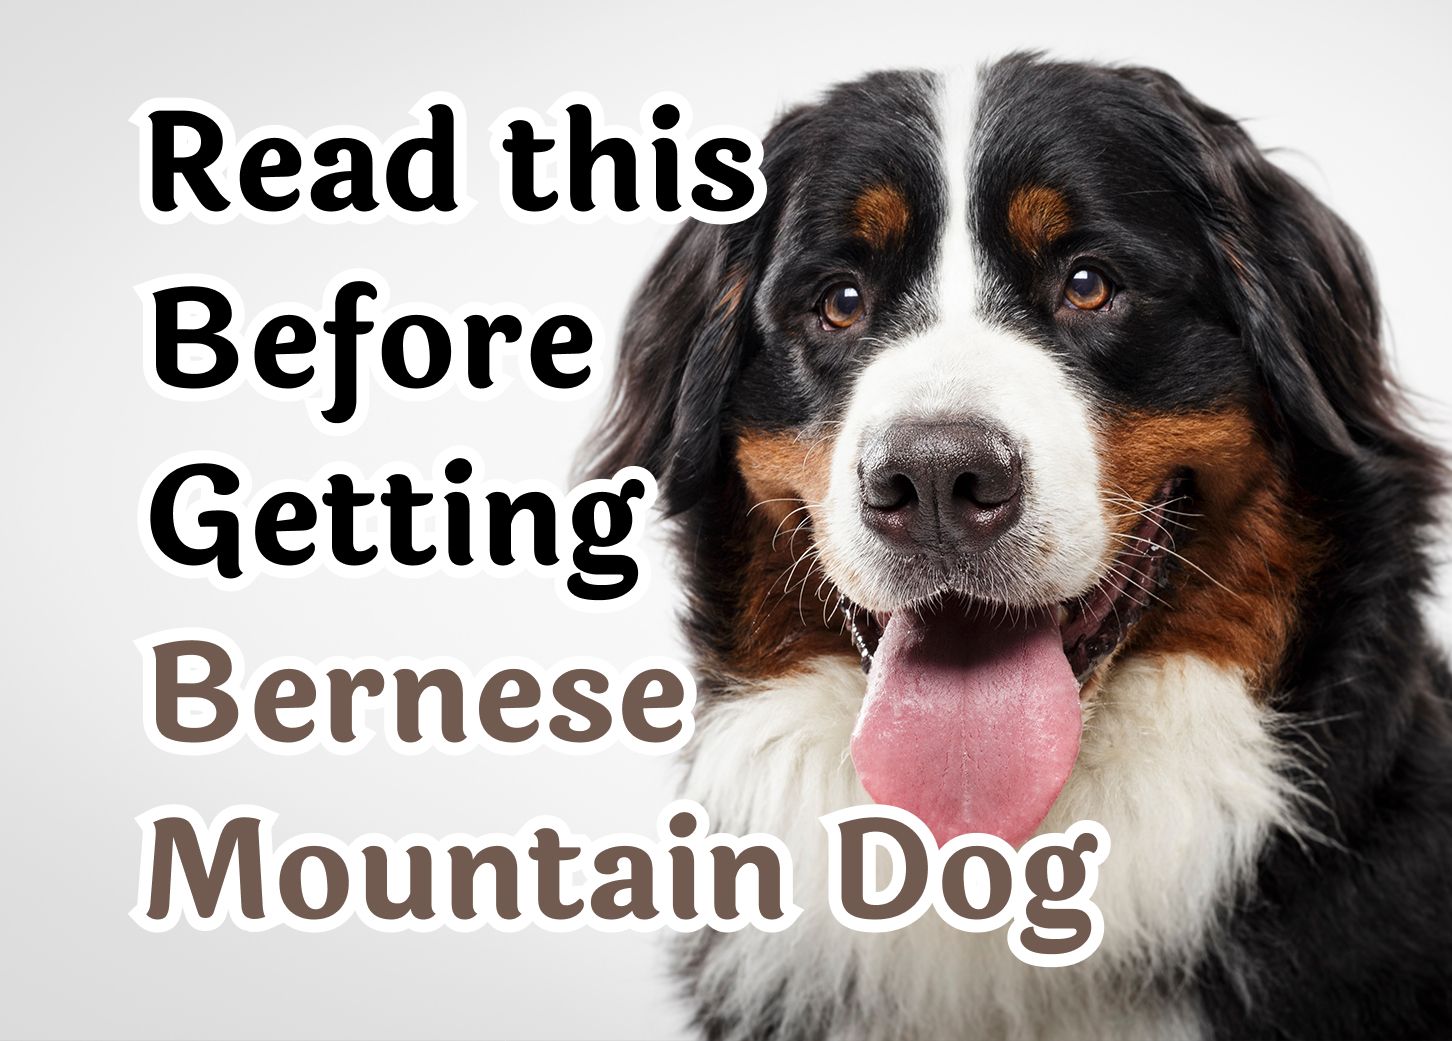 Things to Think About Before Getting a Bernese Mountain Dog